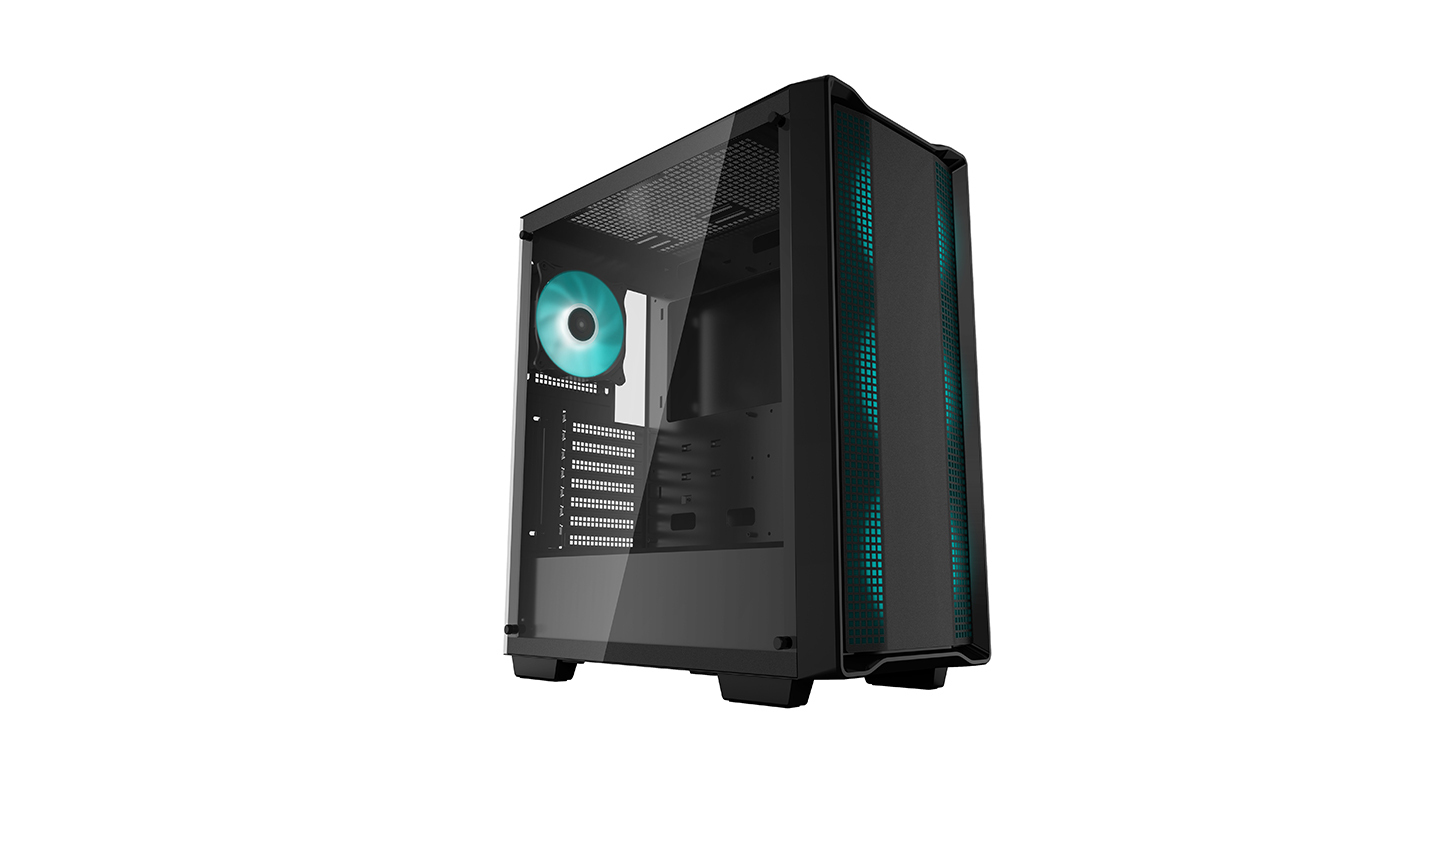 DeepCool CC560 Black Mid-Tower Computer Case, Tempered Glass Window, 4x Pre-Installed LED Fans, Top Mesh Panel, Support Up To 6x120mm or 4x140mm AIO